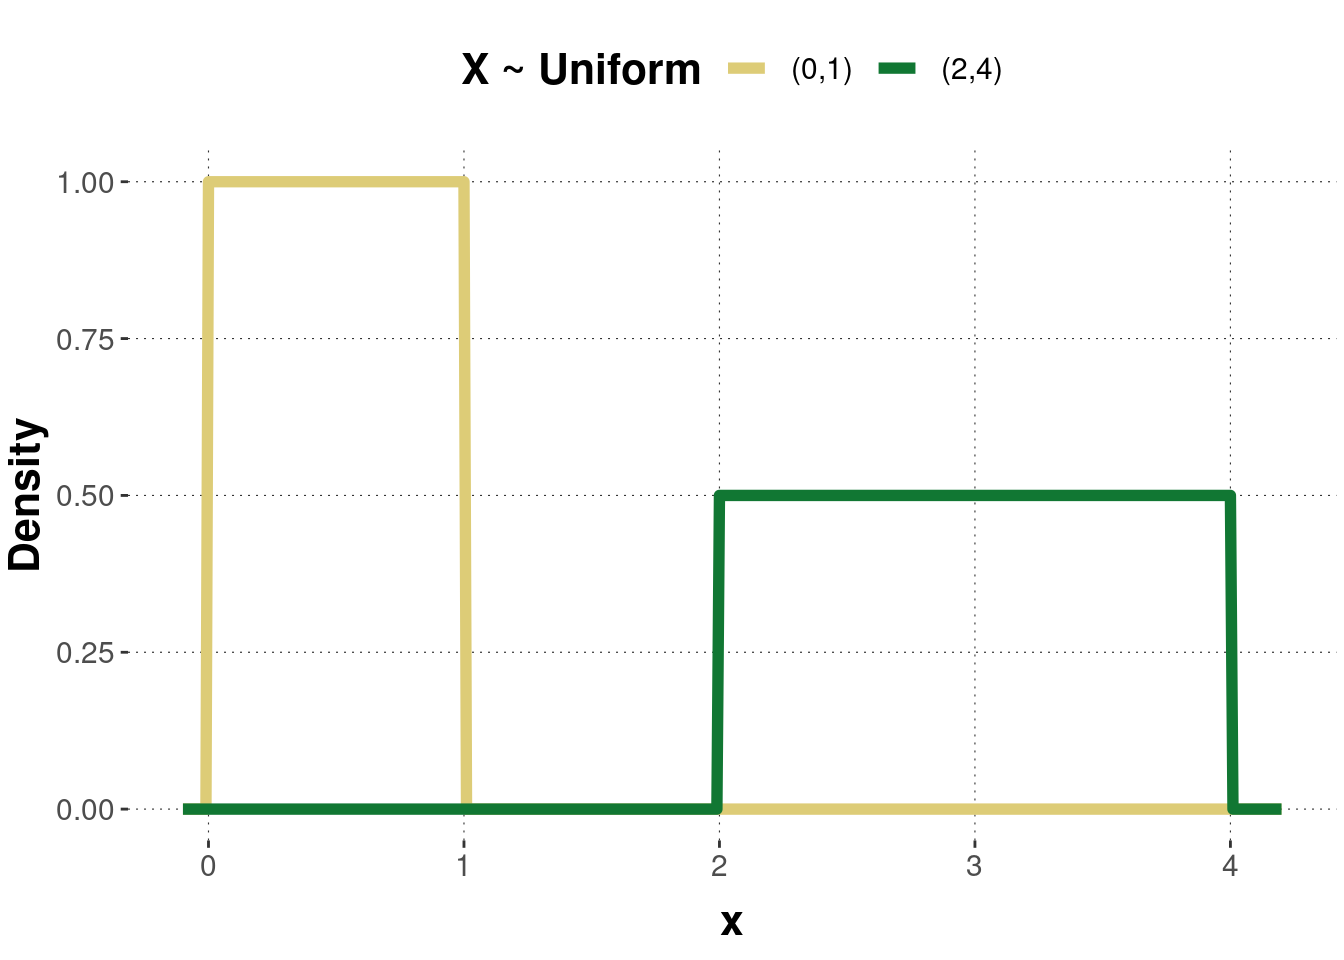 Examples of a probability density function of the uniform distribution. Pairs of numbers in the legend are parameter values $(a,b)$.